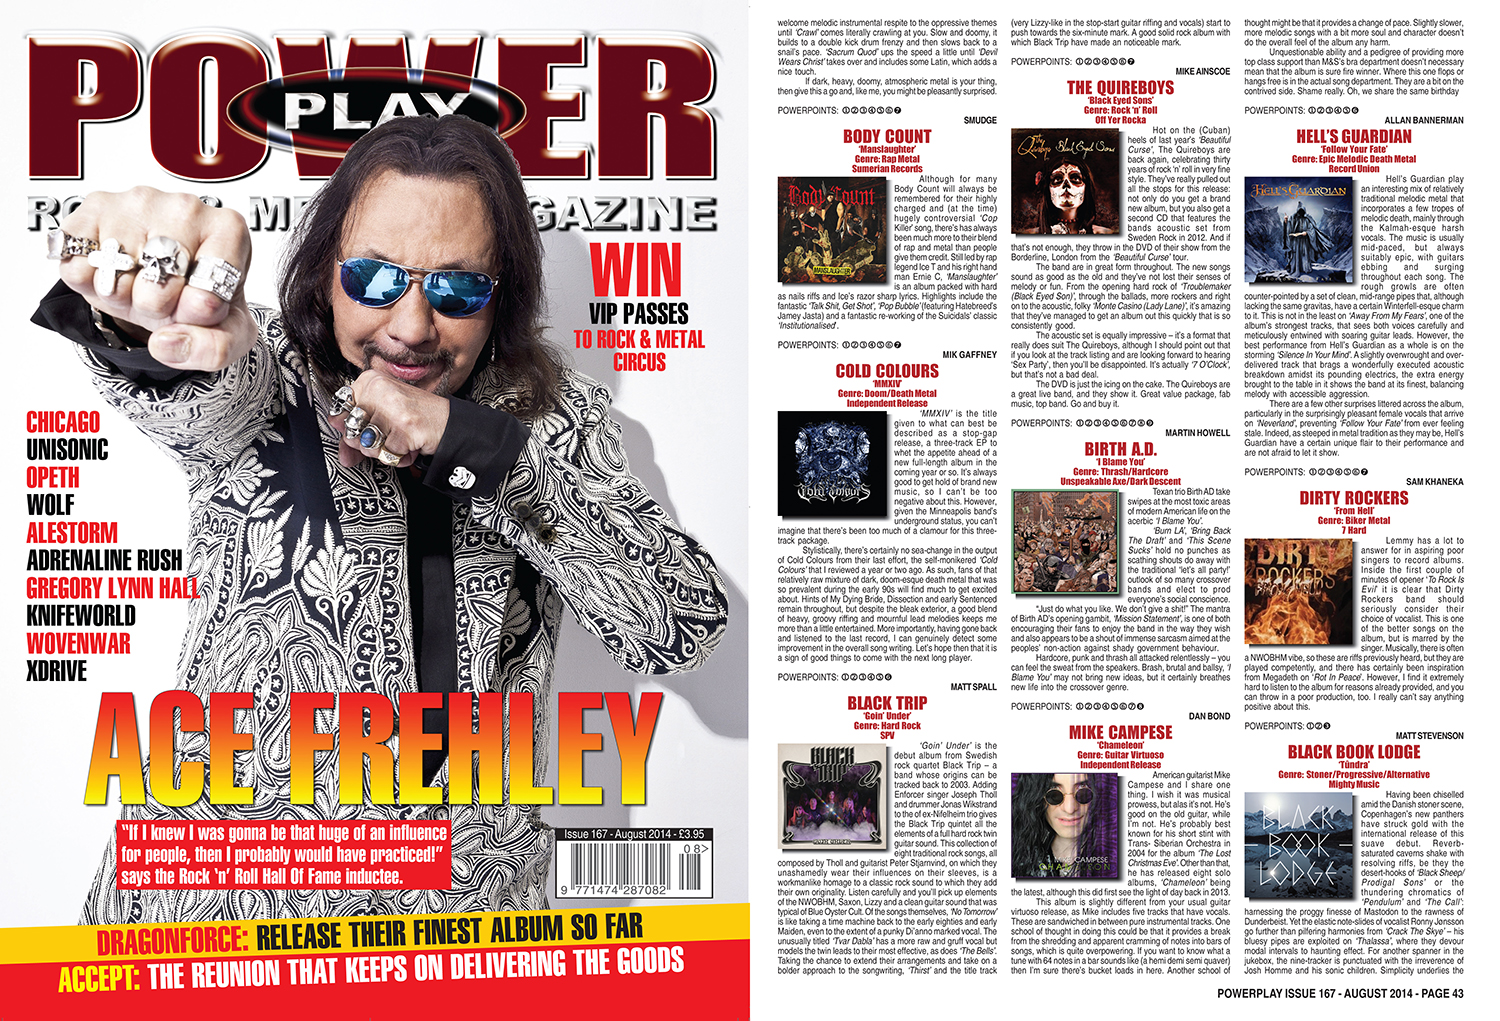 Power Play Magazine August 2014, "Chameleon" Review.